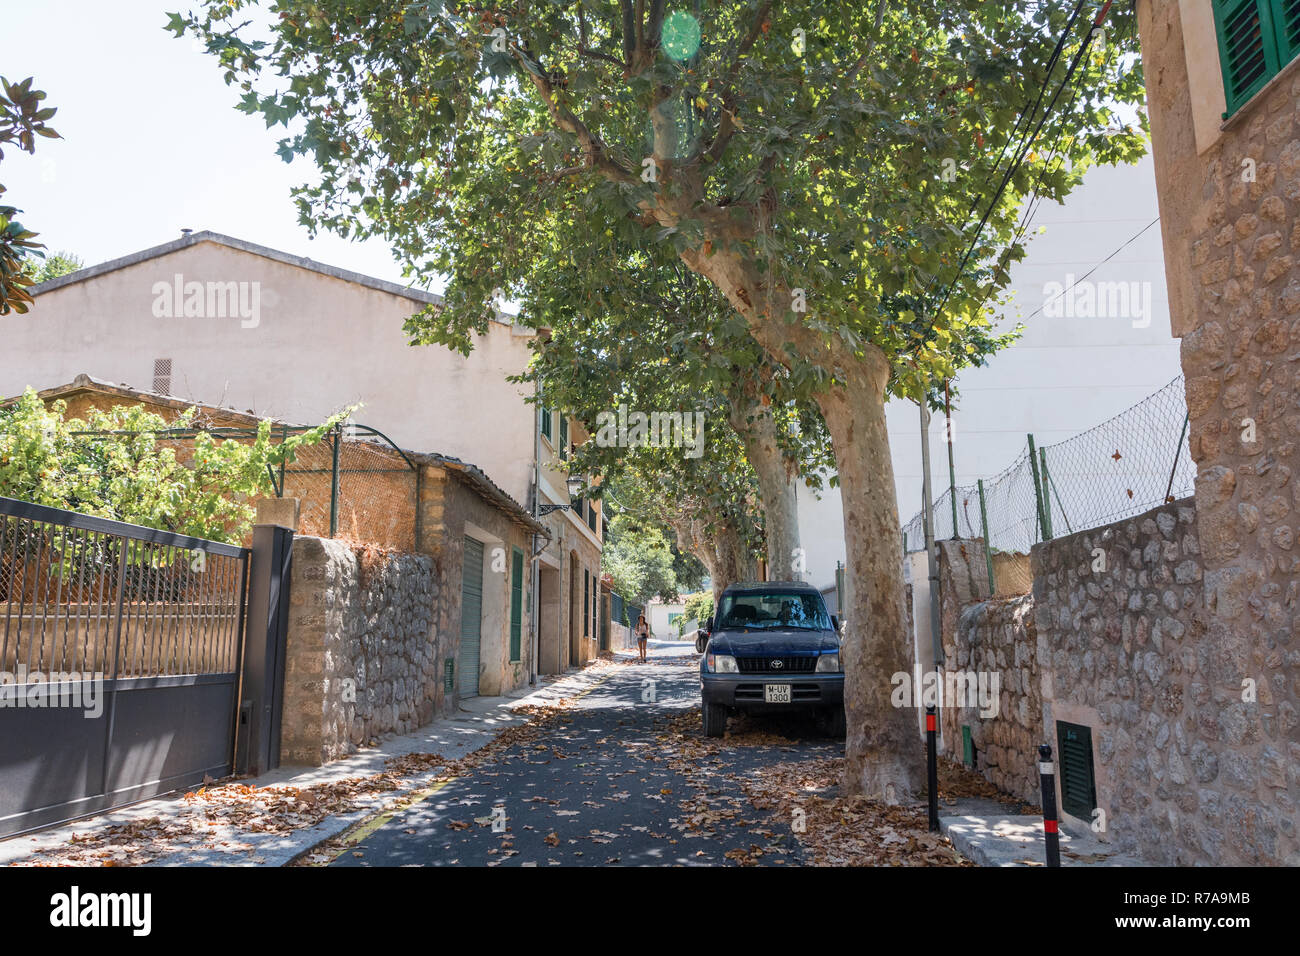 Soller, Mallorca, Spain - July 20, 2013: Off-road car Toyota Land Cruiser Prado J90 is parked on the street. Stock Photo